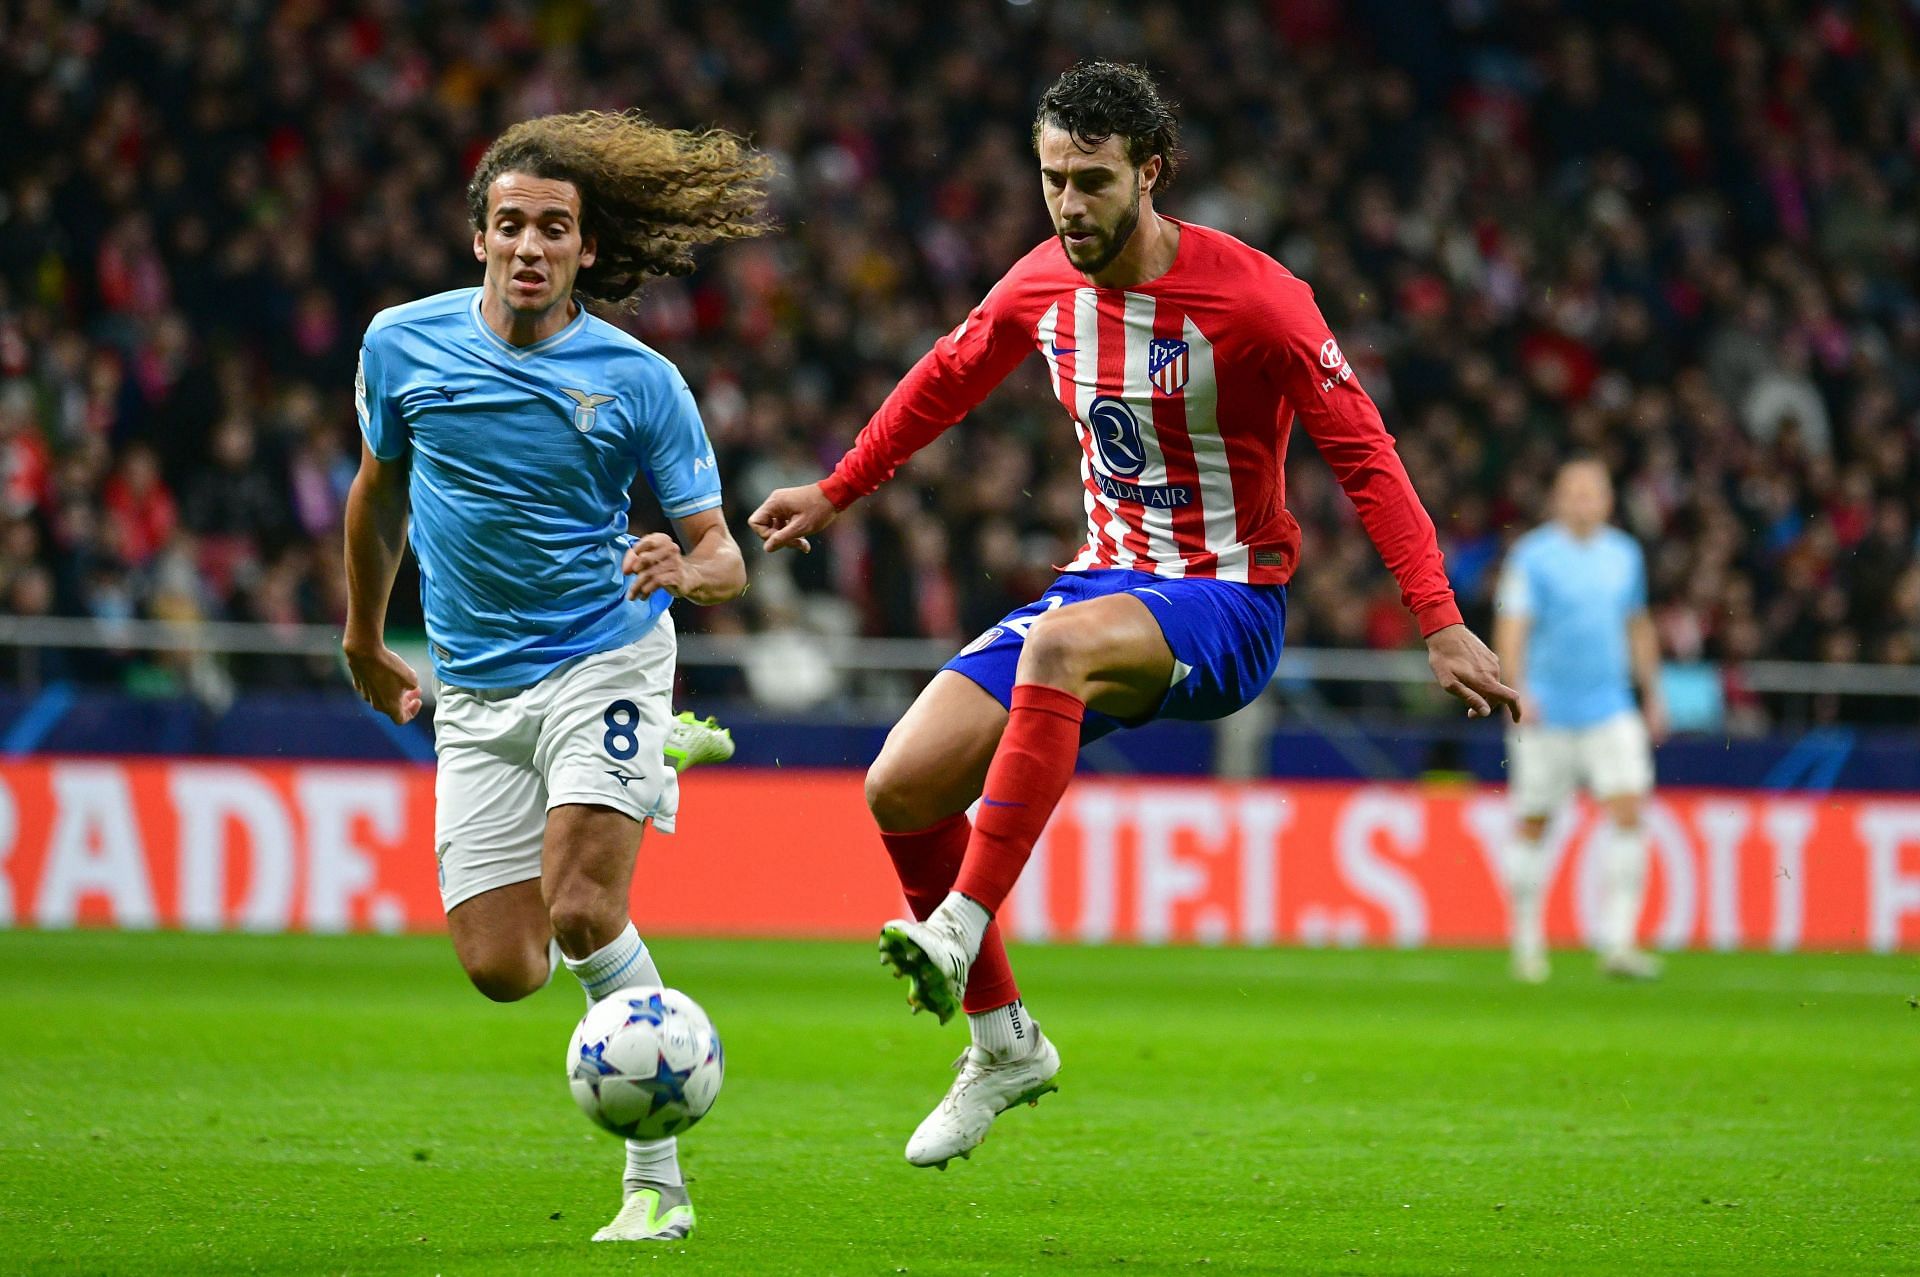 Mario Hermoso is likely to leave Atletico Madrid this summer